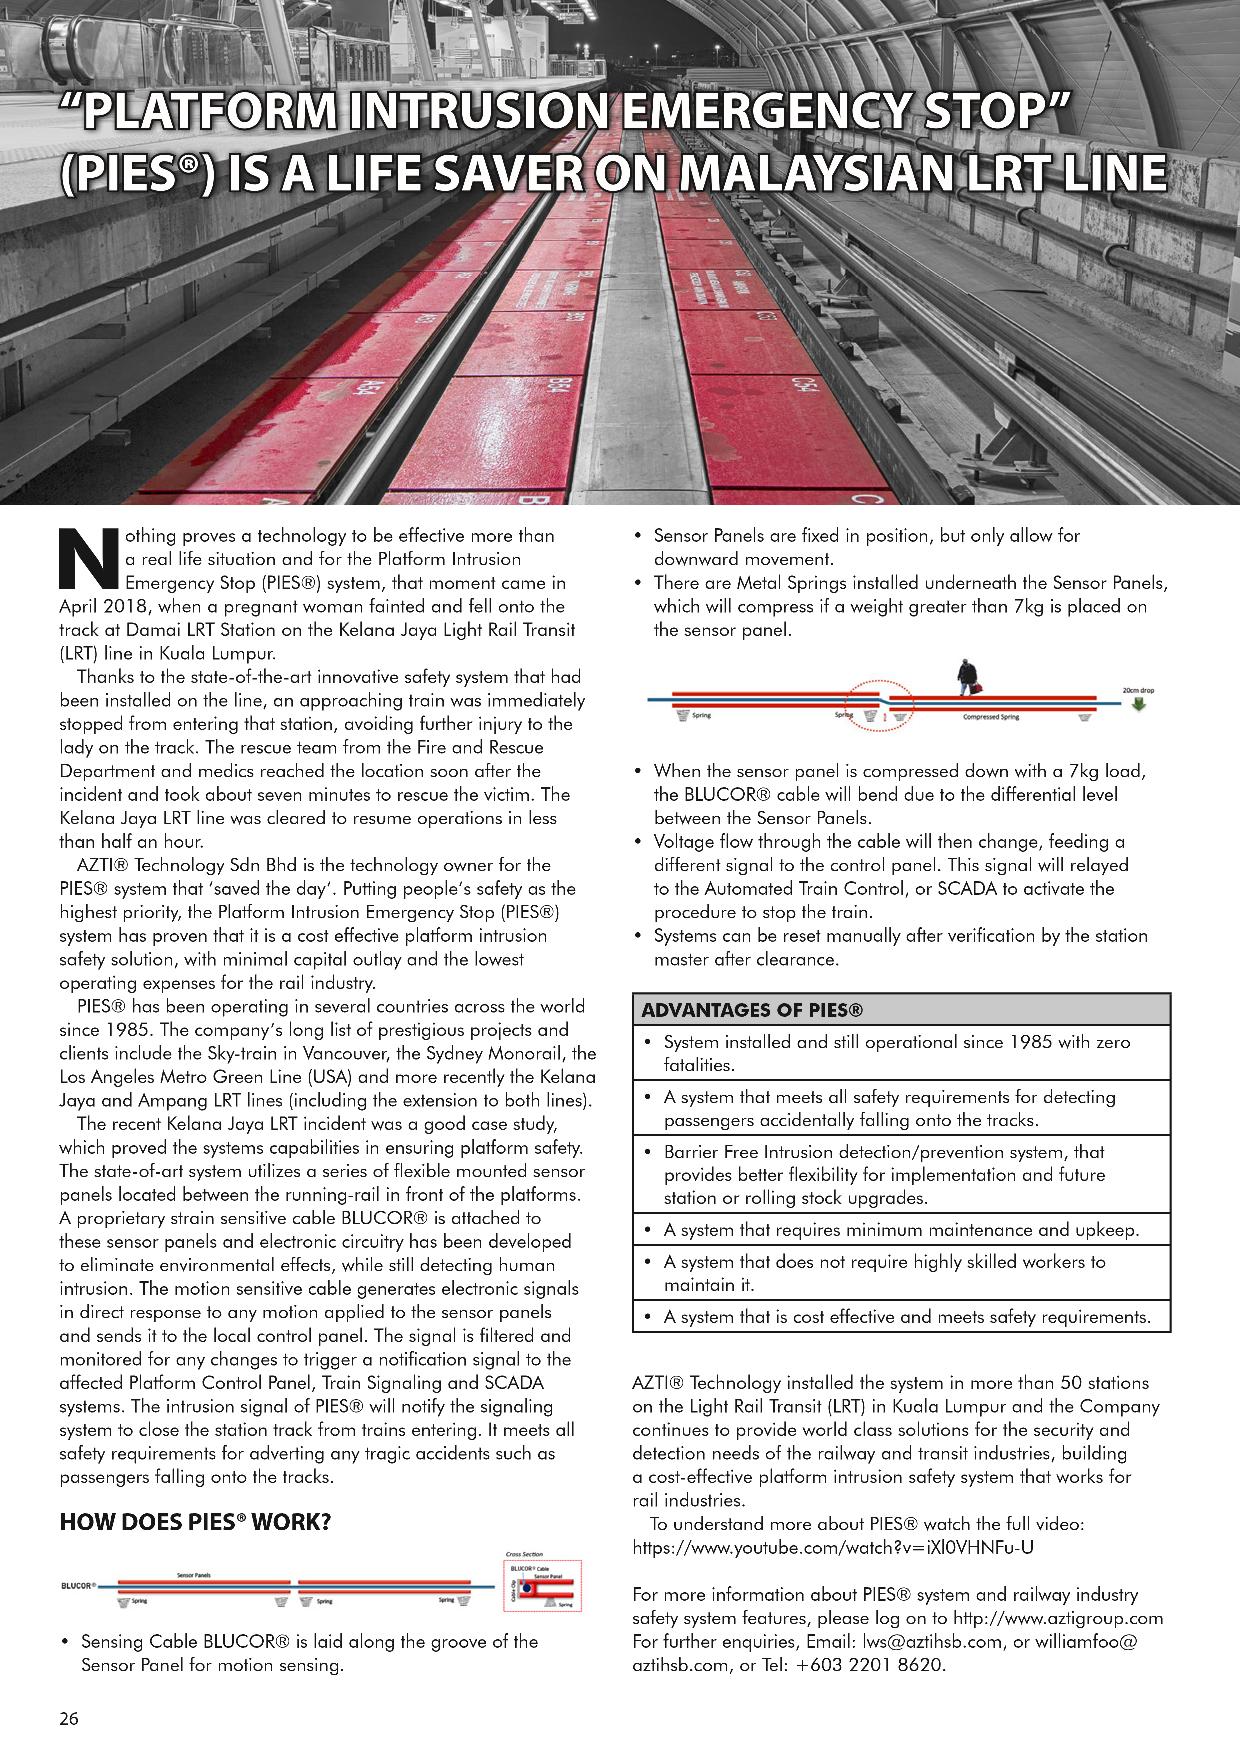 The ASIAN Railway Magazine, June 2019 – “Platform Intrusion Emergency Stop”(PIES®) Is A Life Saver on MALAYSIAN LRT Line